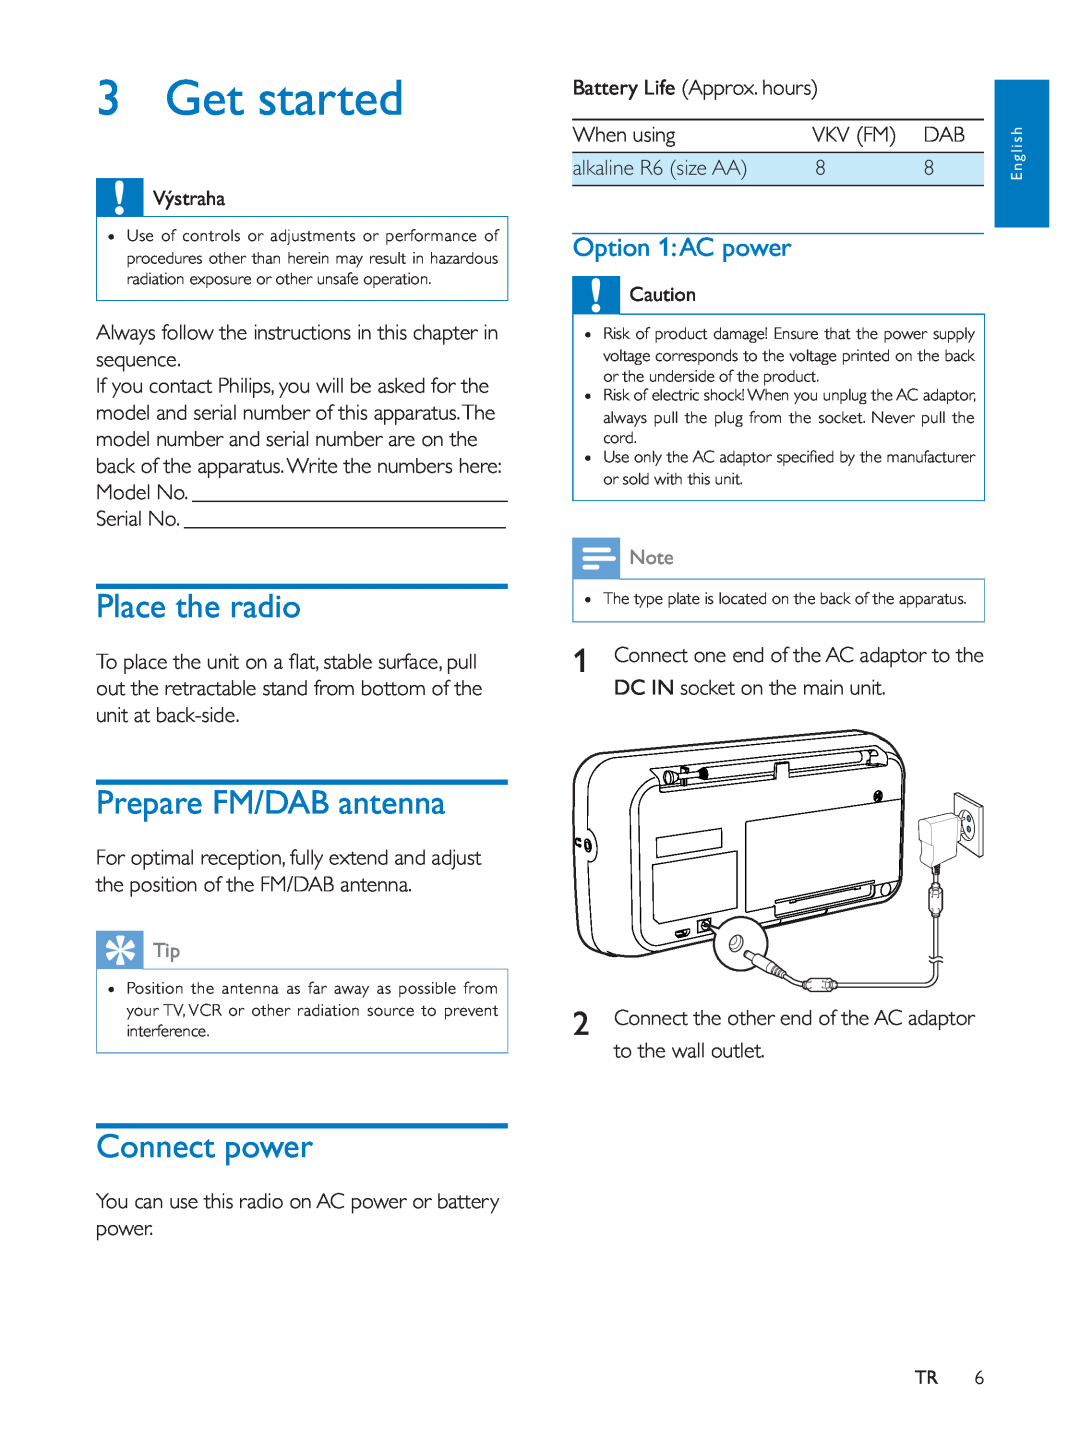 Philips AE5250 user manual Get started, Place the radio, Prepare FM/DAB antenna, Connect power, Option 1 AC power 